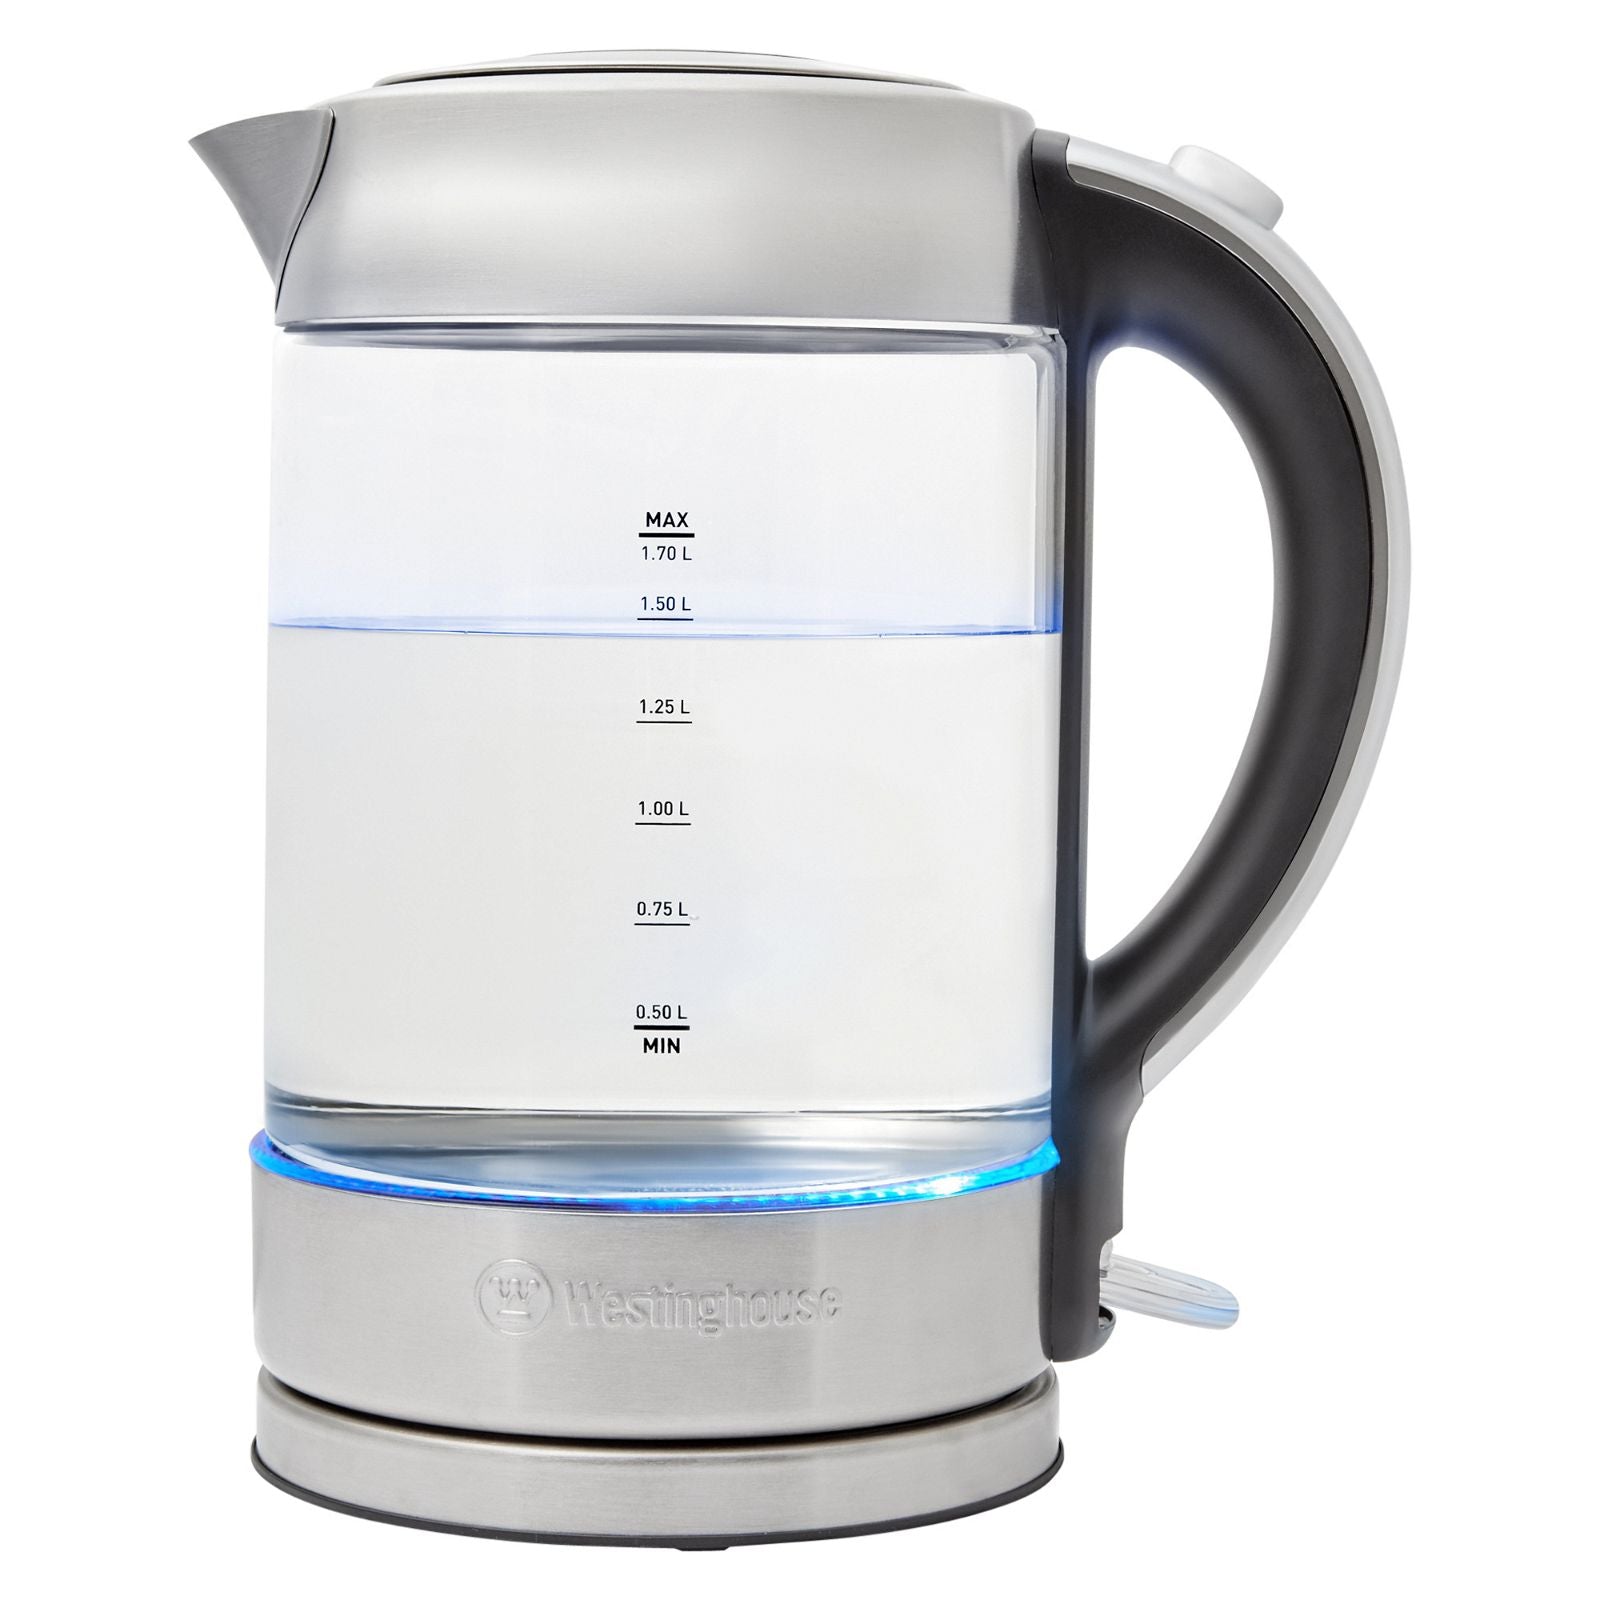 Westinghouse Kettle 1.7L Glass-#product_category#- Distributed by:  under license